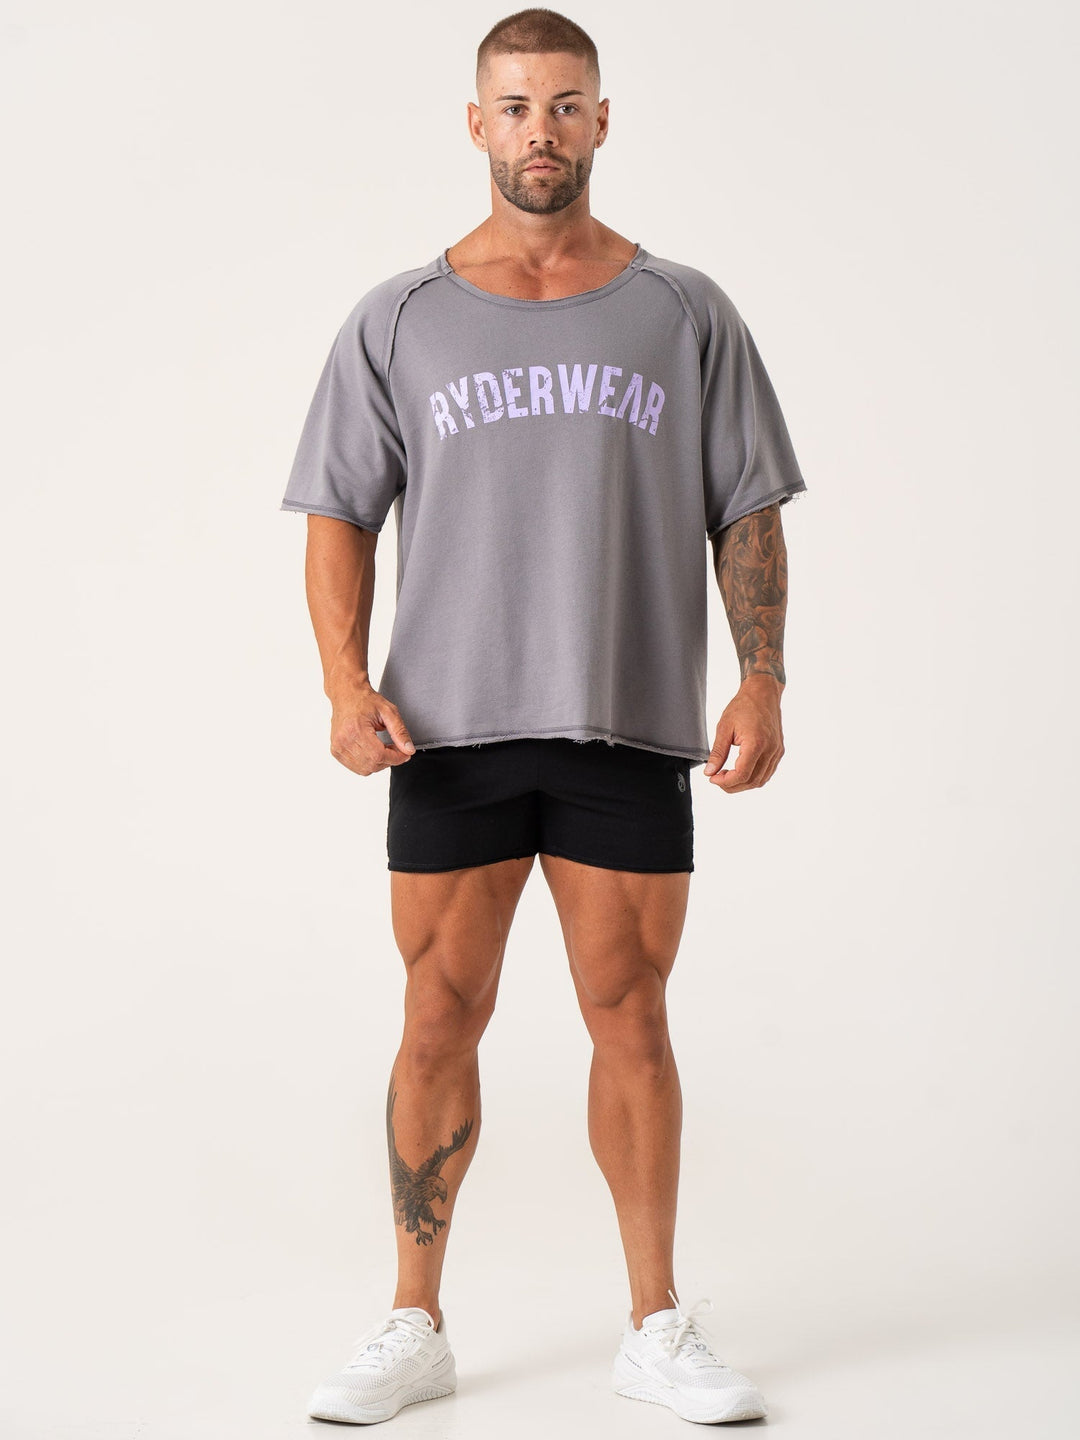 Force Rag Top - Charcoal Clothing Ryderwear 